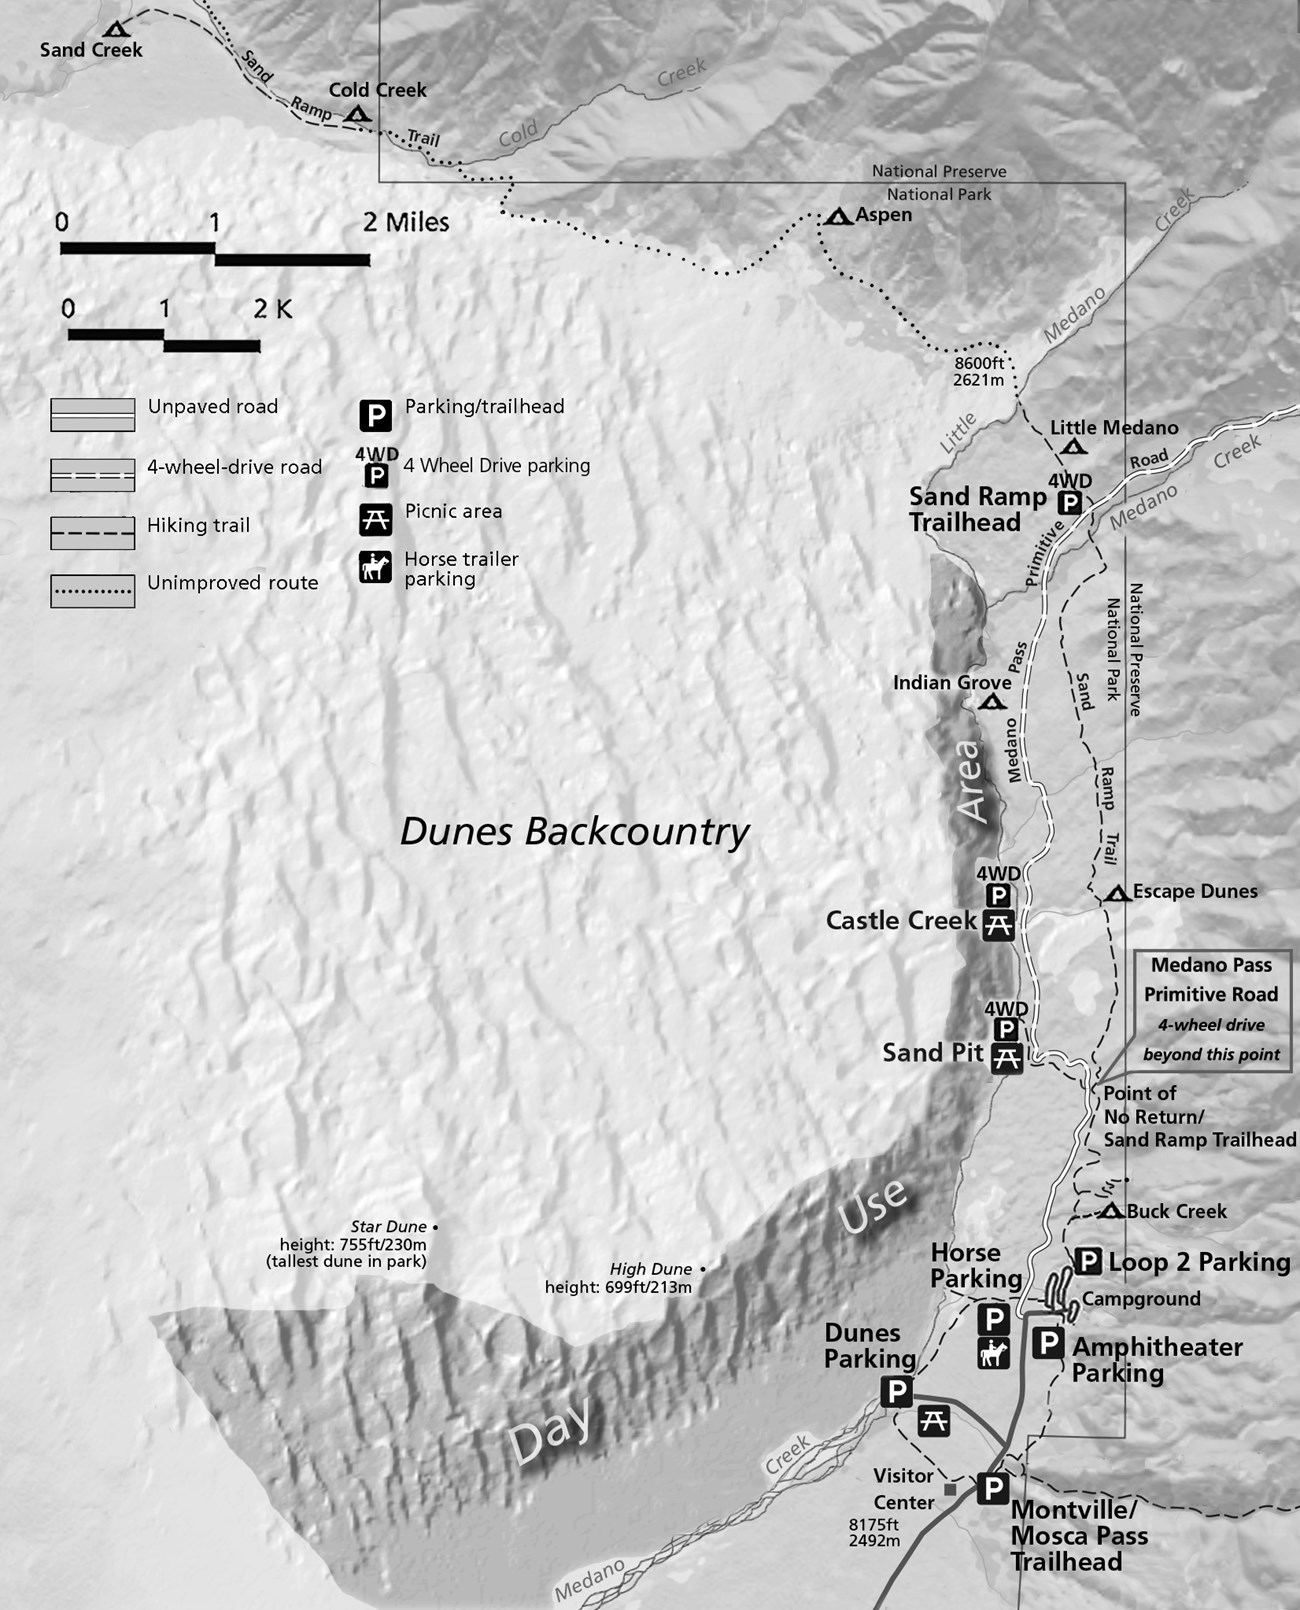 Black and white map showing dunes and forest locations for backpacking